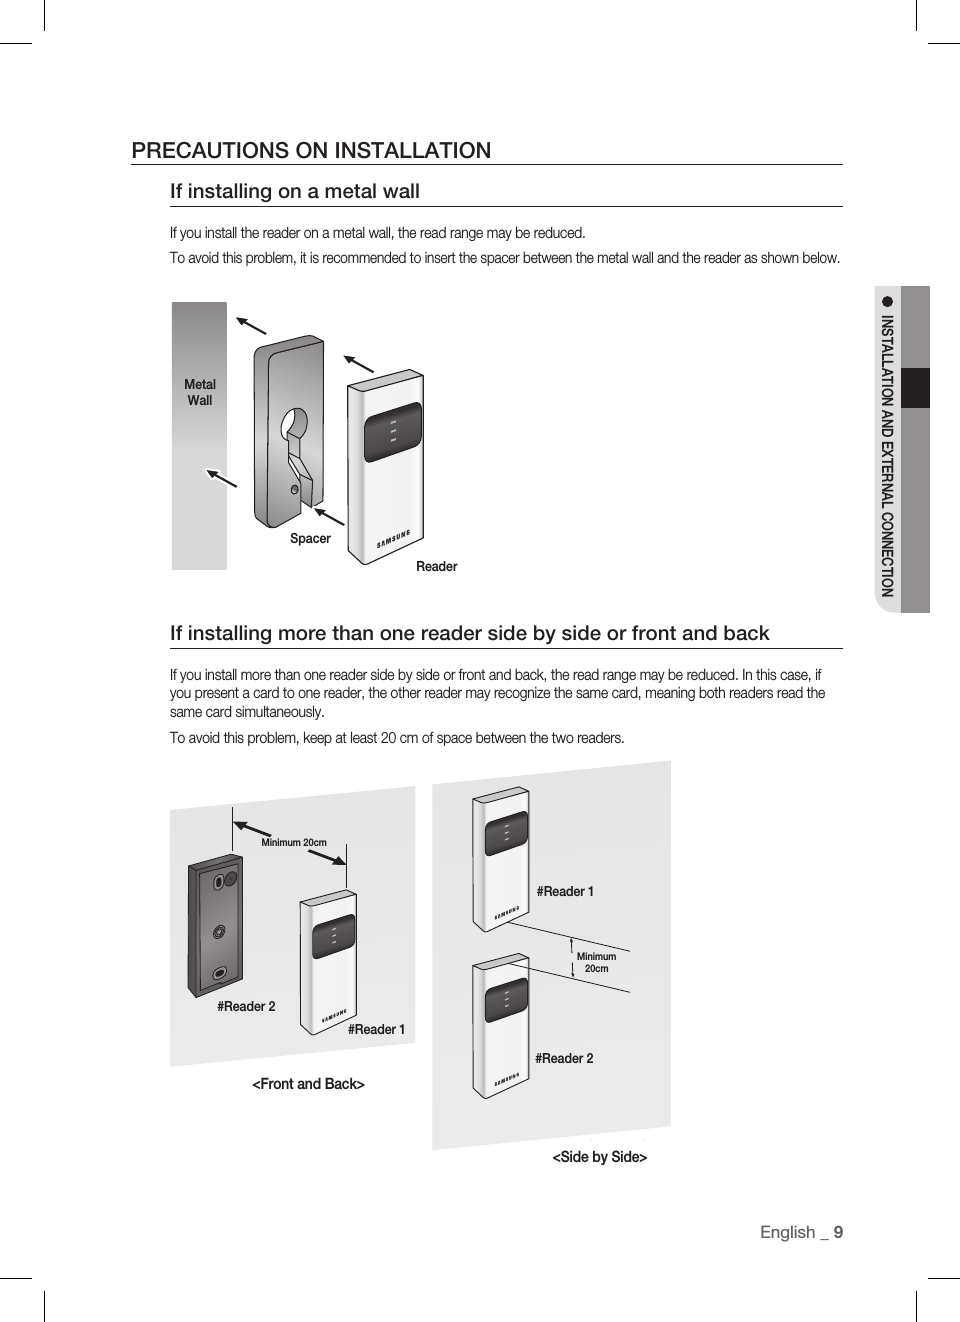 EnglisEnglish _ 9INSTALLATION AND EXTERNAL CONNECTIONPRECAUTIONS ON INSTALLATIONIf installing on a metal wallIf you install the reader on a metal wall, the read range may be reduced.To avoid this problem, it is recommended to insert the spacer between the metal wall and the reader as shown below.If installing more than one reader side by side or front and backIf you install more than one reader side by side or front and back, the read range may be reduced. In this case, if you present a card to one reader, the other reader may recognize the same card, meaning both readers read the same card simultaneously.To avoid this problem, keep at least 20 cm of space between the two readers.BACK TO BACKINSTALLATIONSIDE BY SIDEINSTALLATION&lt;Front and Back&gt;&lt;Side by Side&gt;Metal WallSpacerReader#Reader 2#Reader 1Minimum 20cm#Reader 1#Reader 2Minimum 20cm